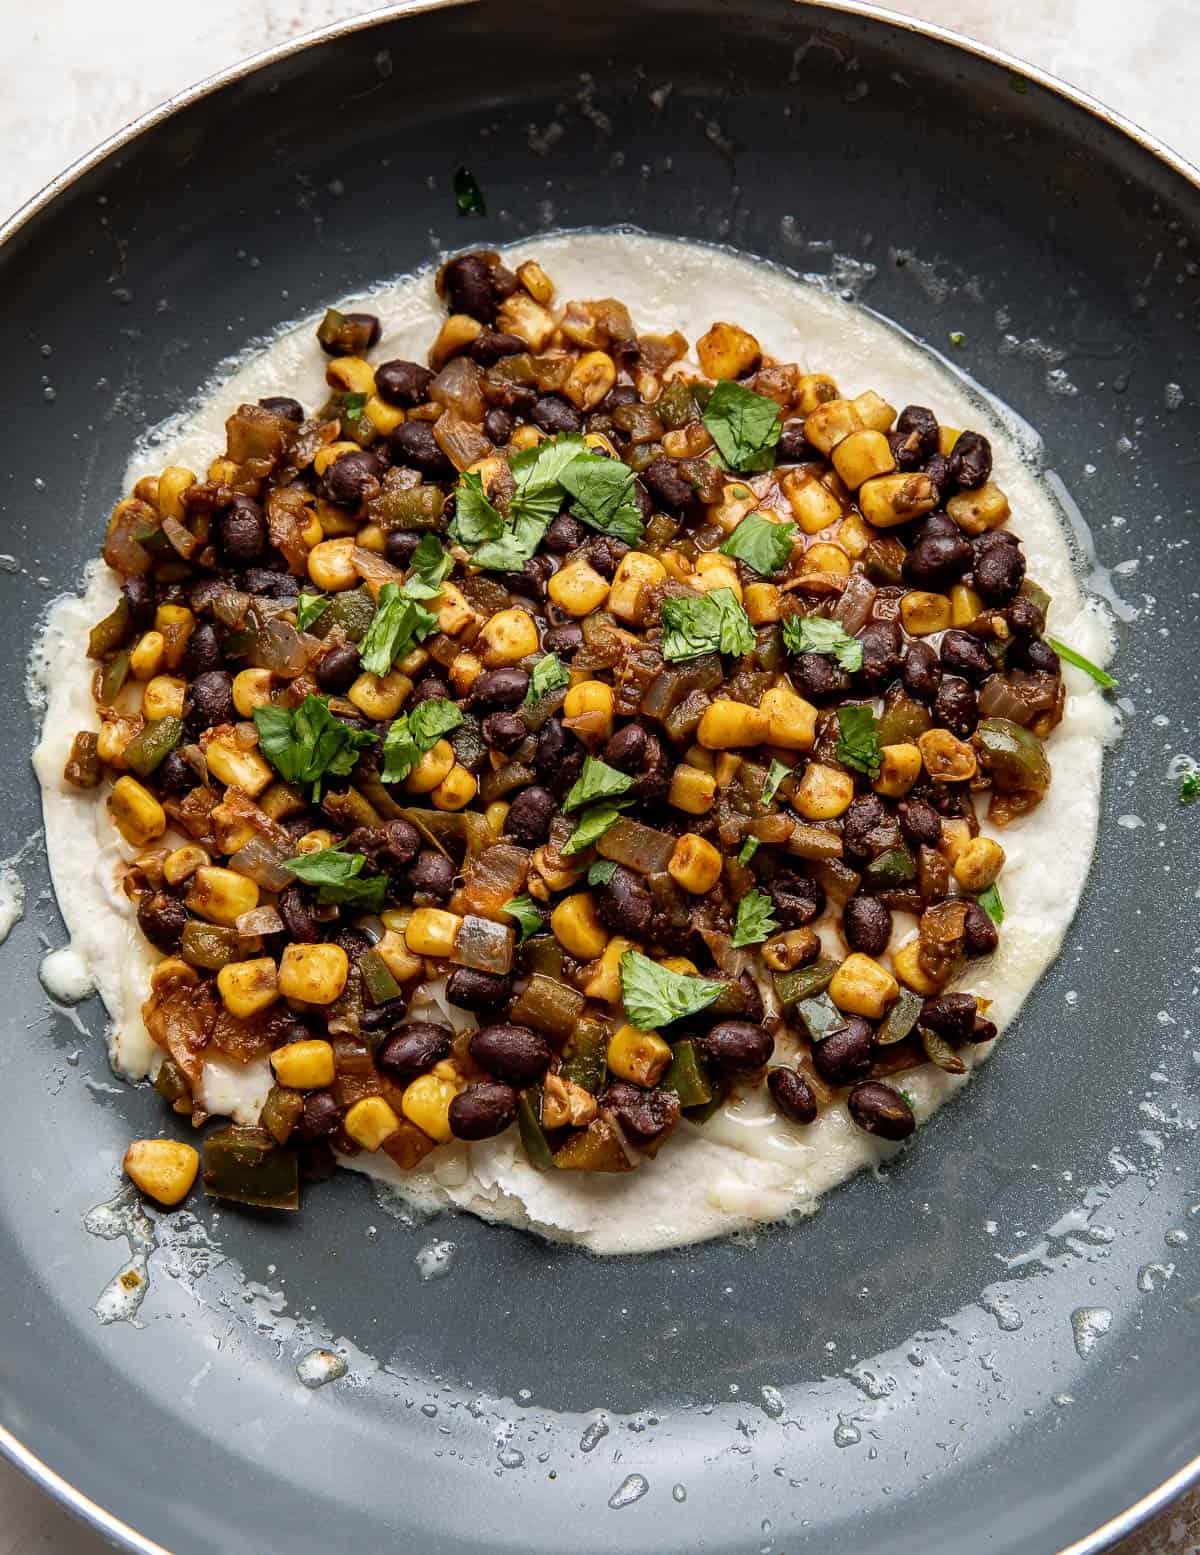 A tortilla topped with a Black Bean and Corn mixture.